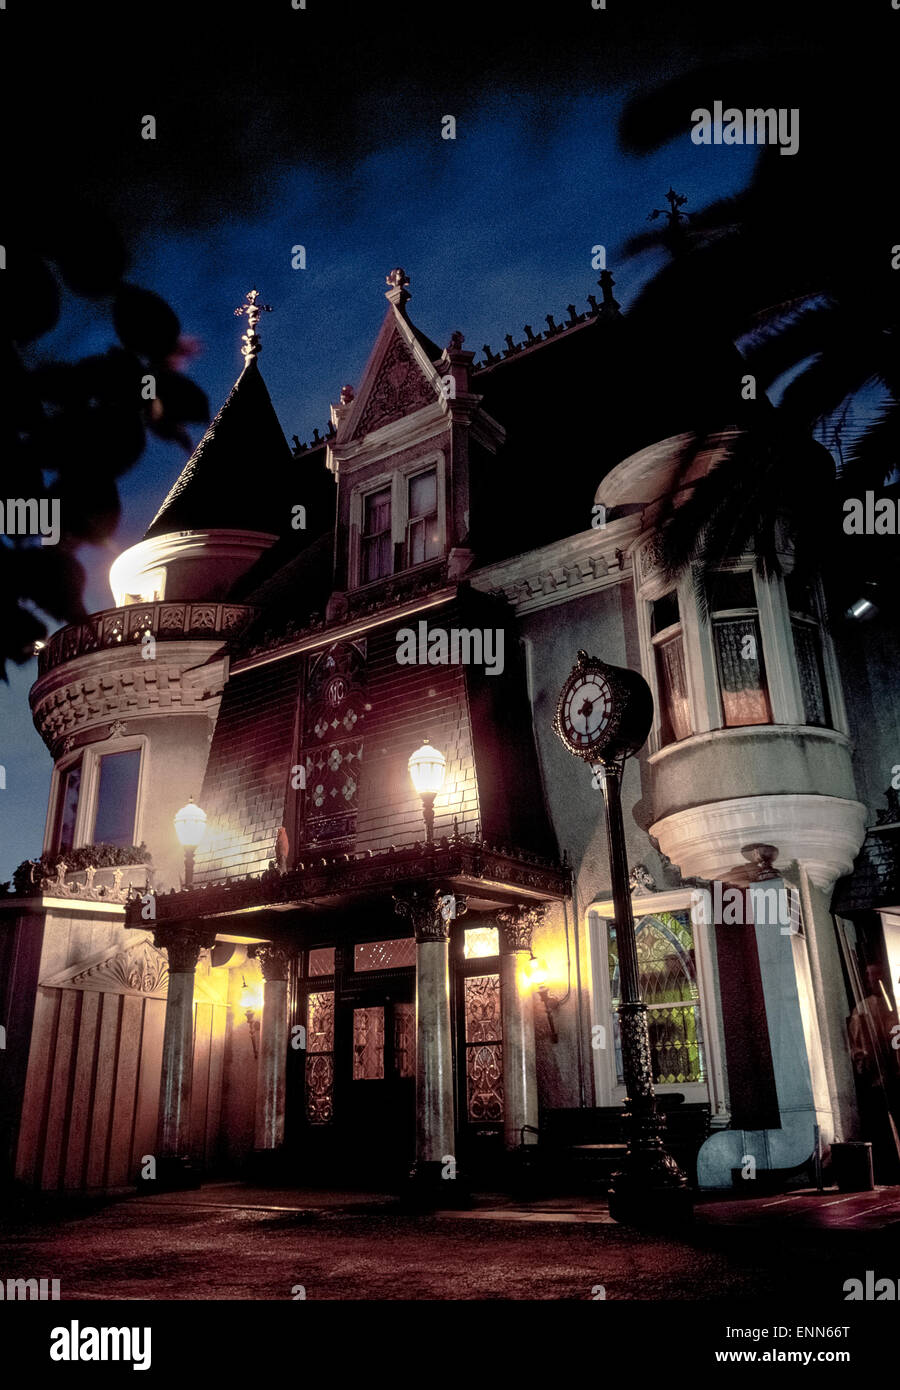 A nighttime view of the entrance to the world-famed Magic Castle, a private nightclub for magicians and magic enthusiasts in Hollywood, California, USA. Entry to the 1909 mansion is only for those who belong to the Academy of Magical Arts, an organization devoted to the advancement of the ancient art of magic. Academy members and their guests are treated nightly to a number of magic shows as well as dining and drinking at this historic social club. Stock Photo